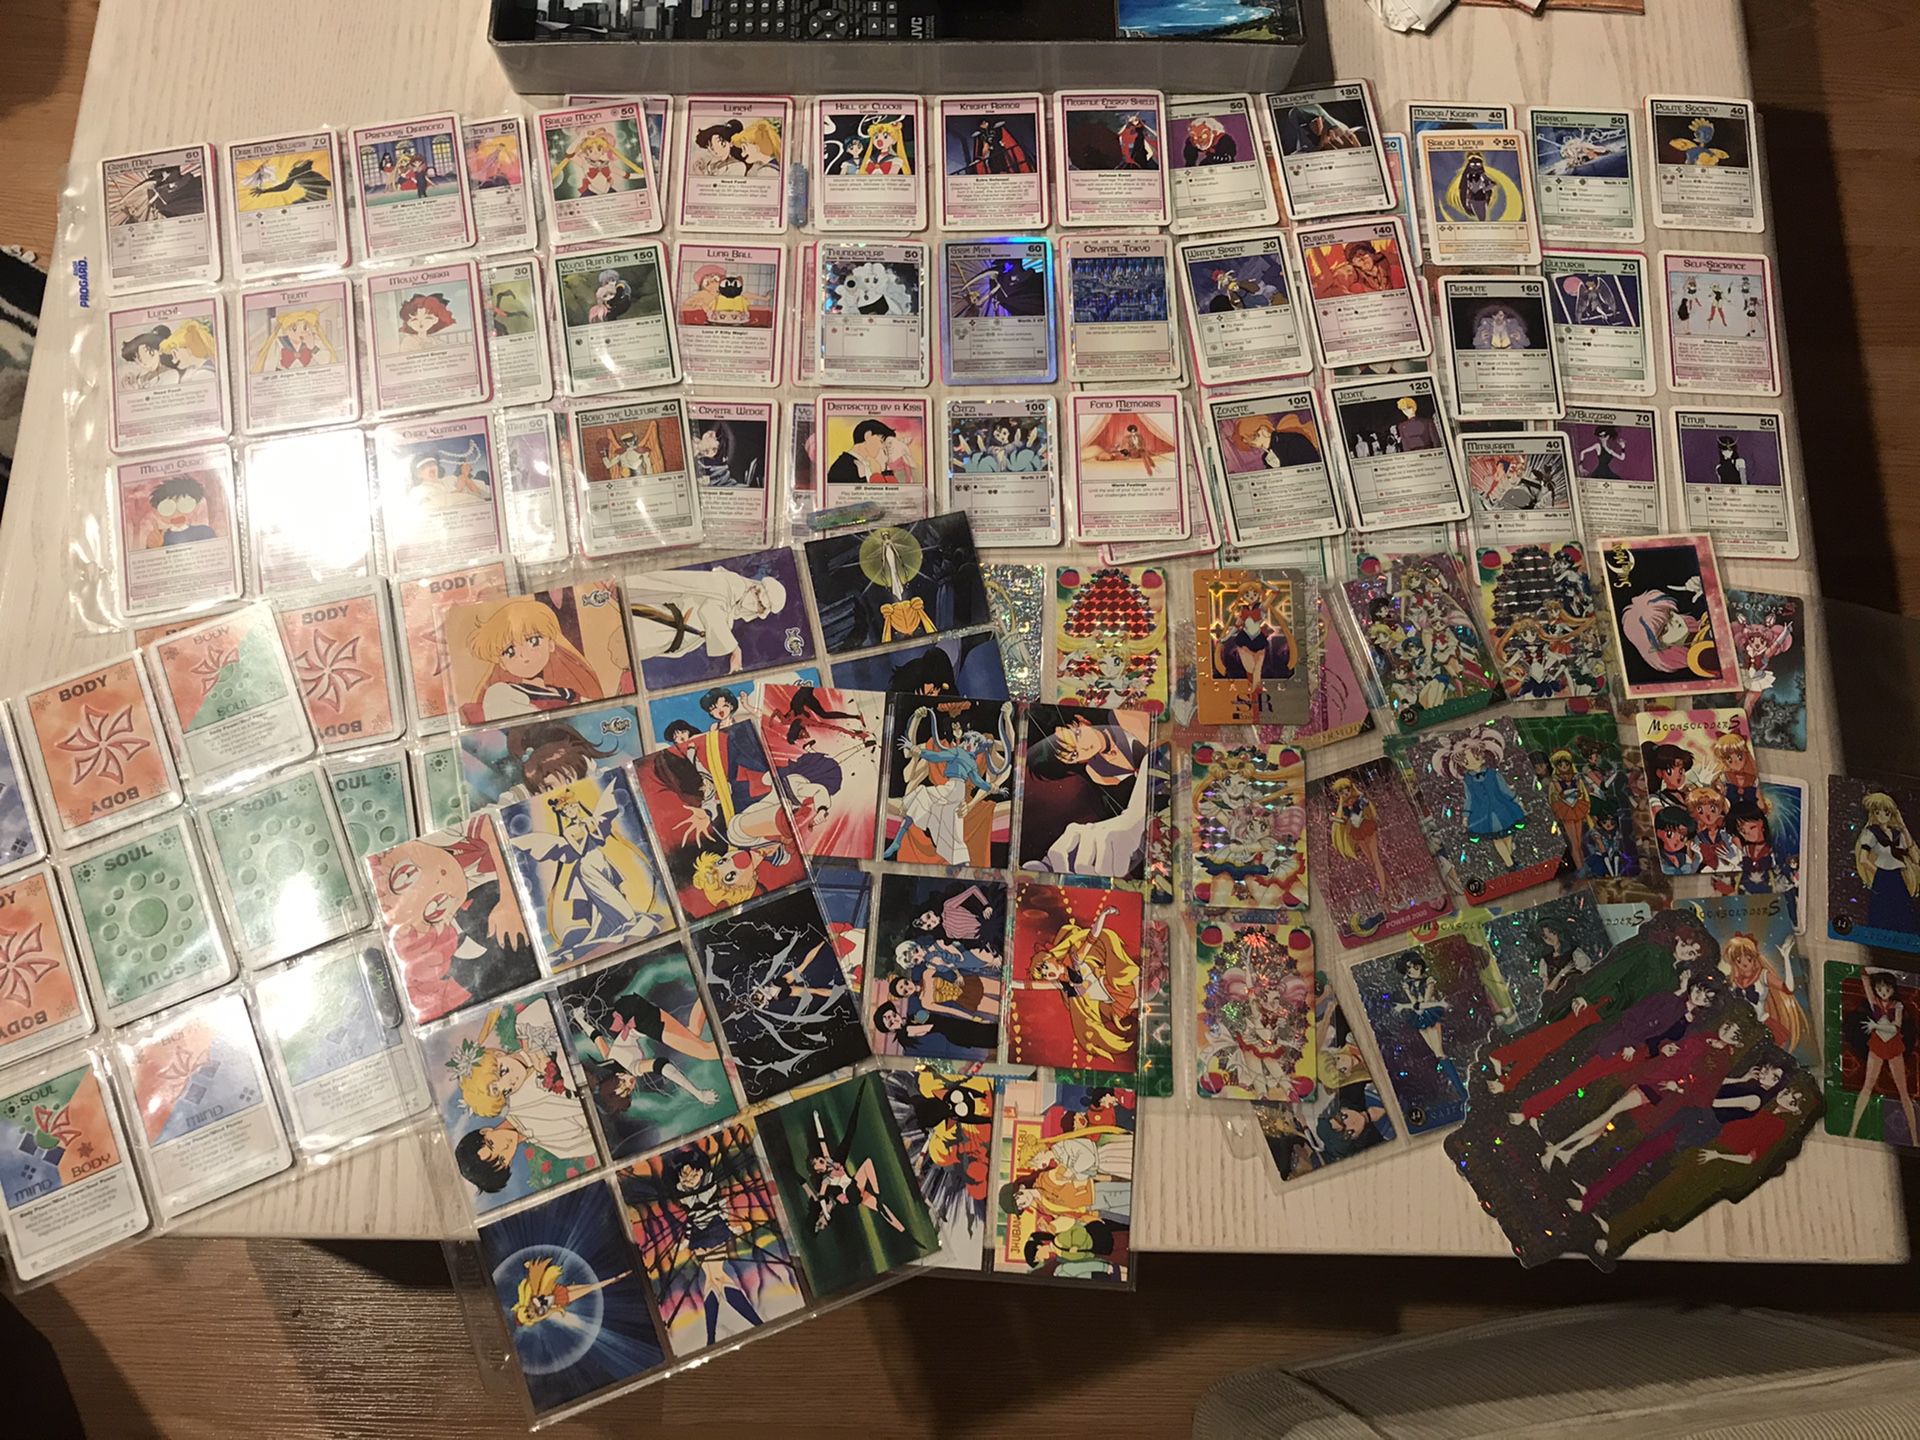 200+ Sailor moon trading cards, tv show cards, coloring book & stickers